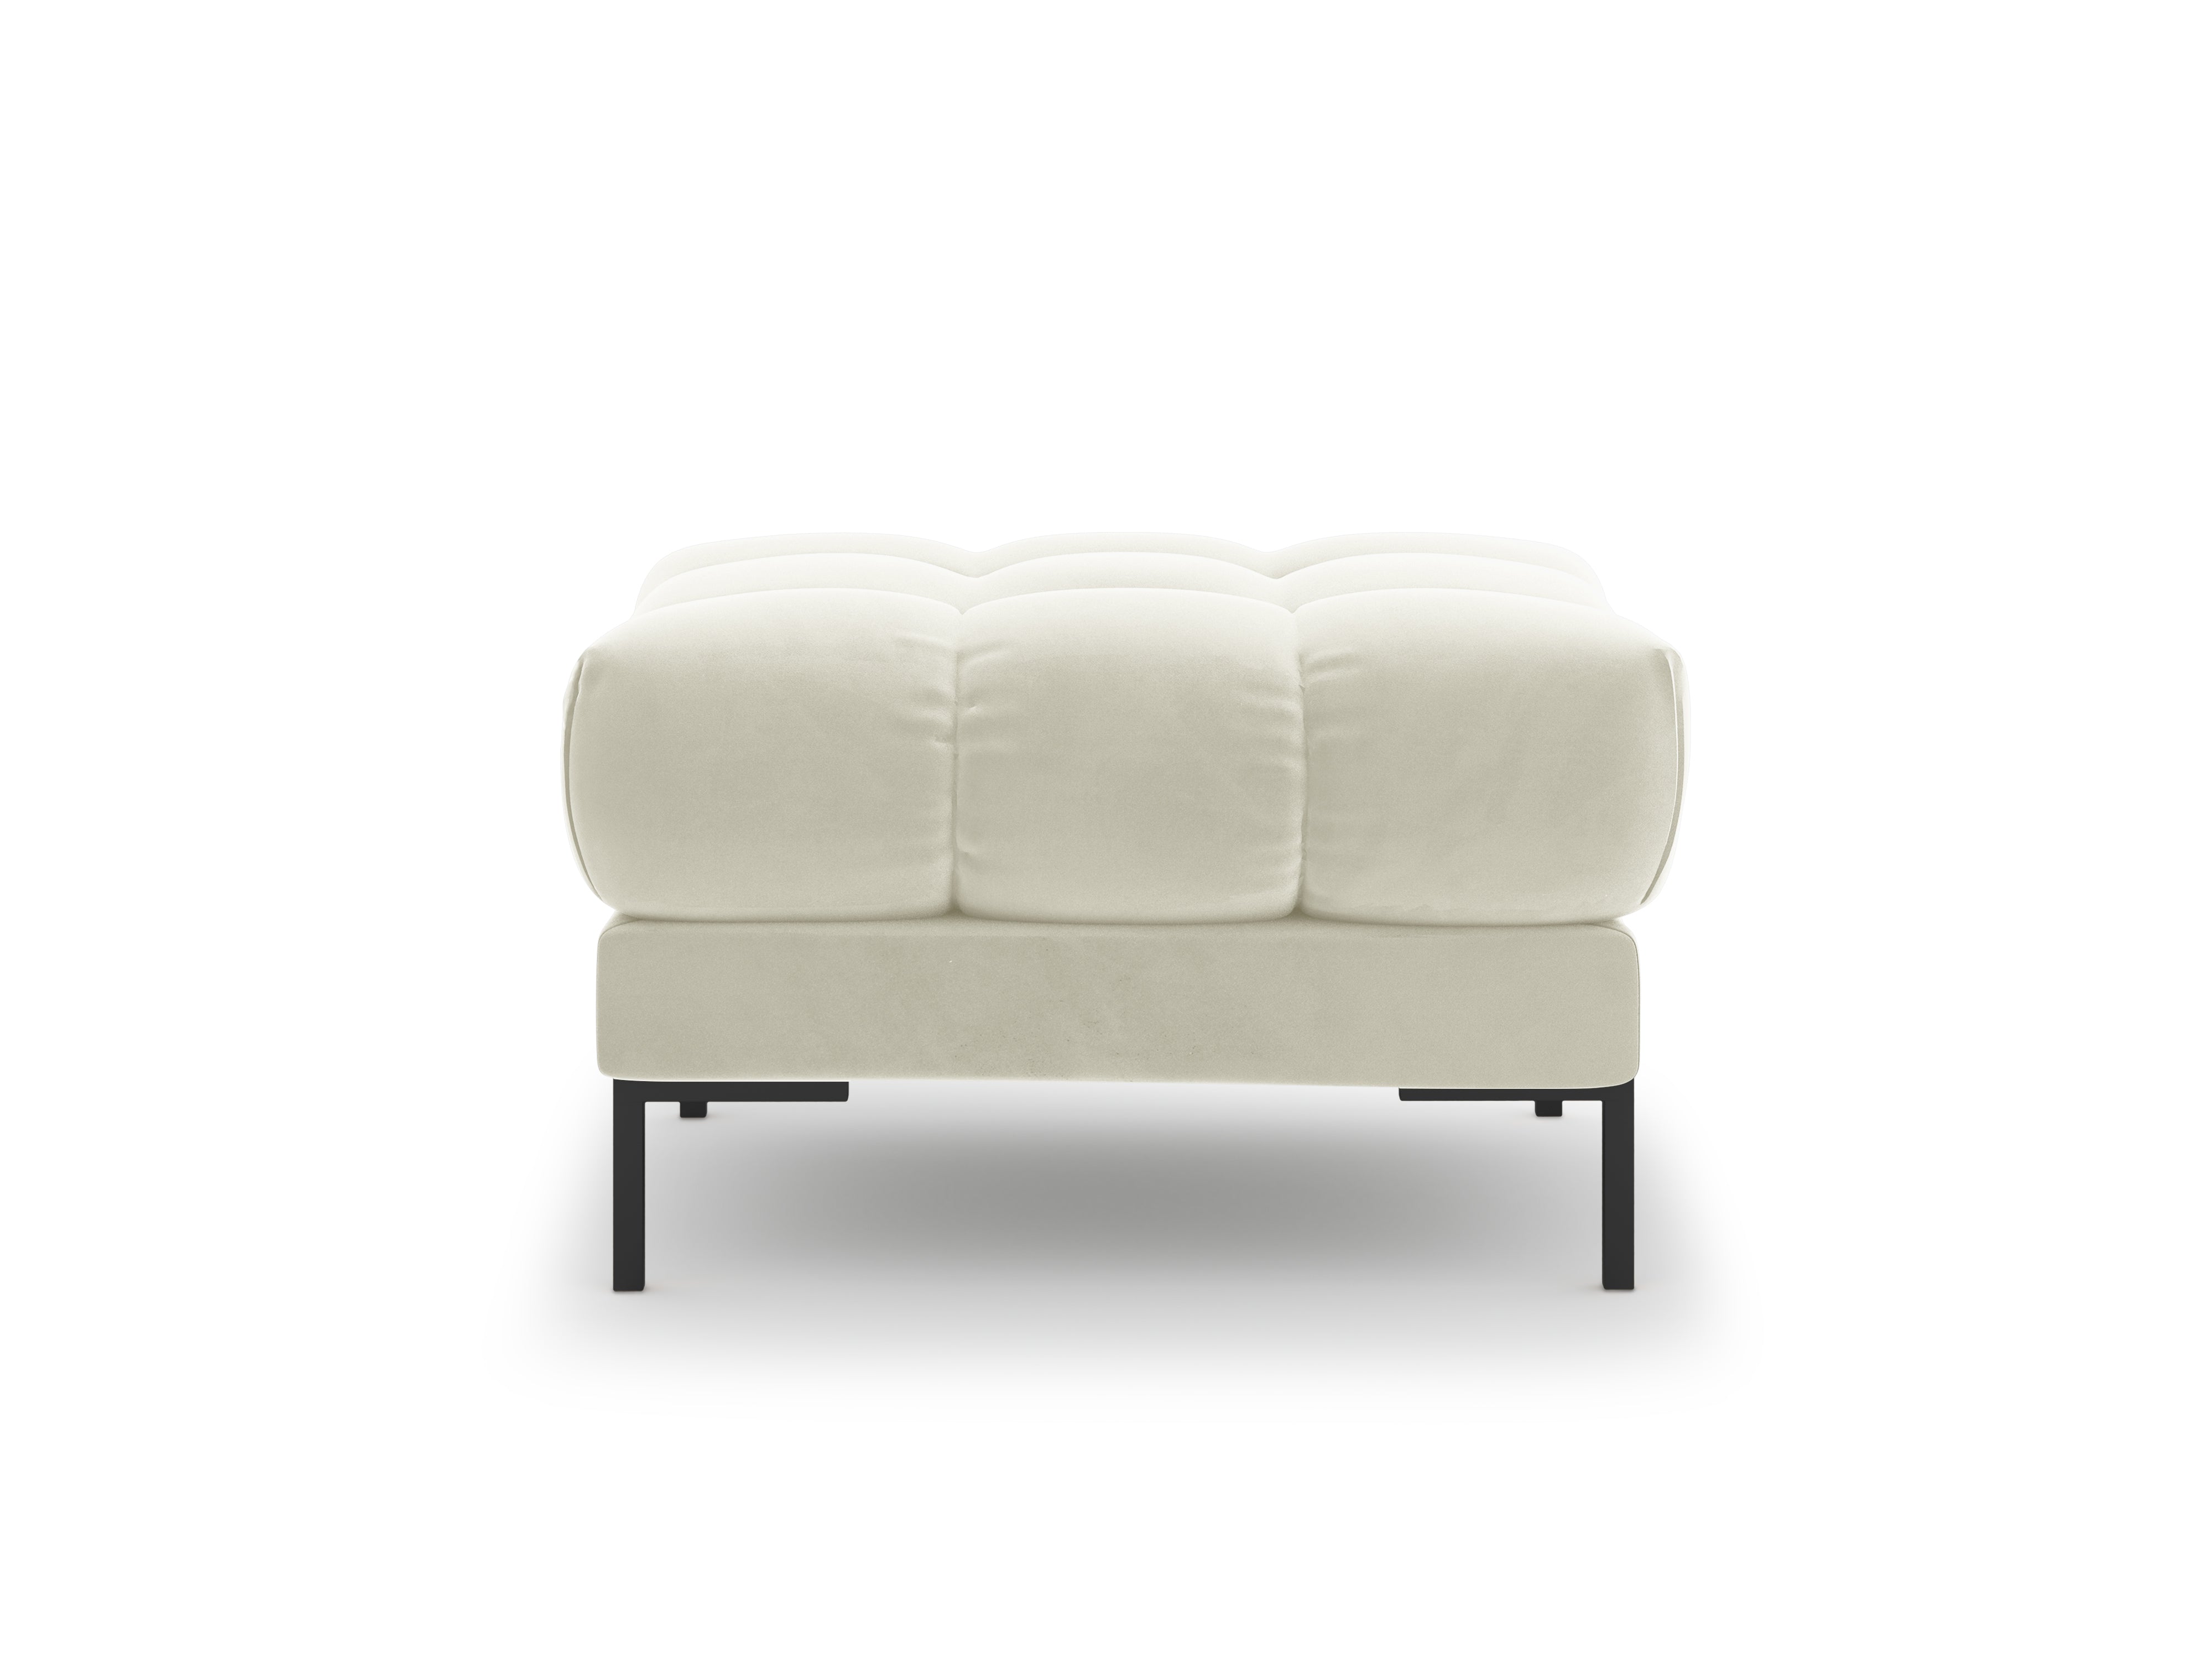 MAMAIA velvet pouffe in light beige with a black base